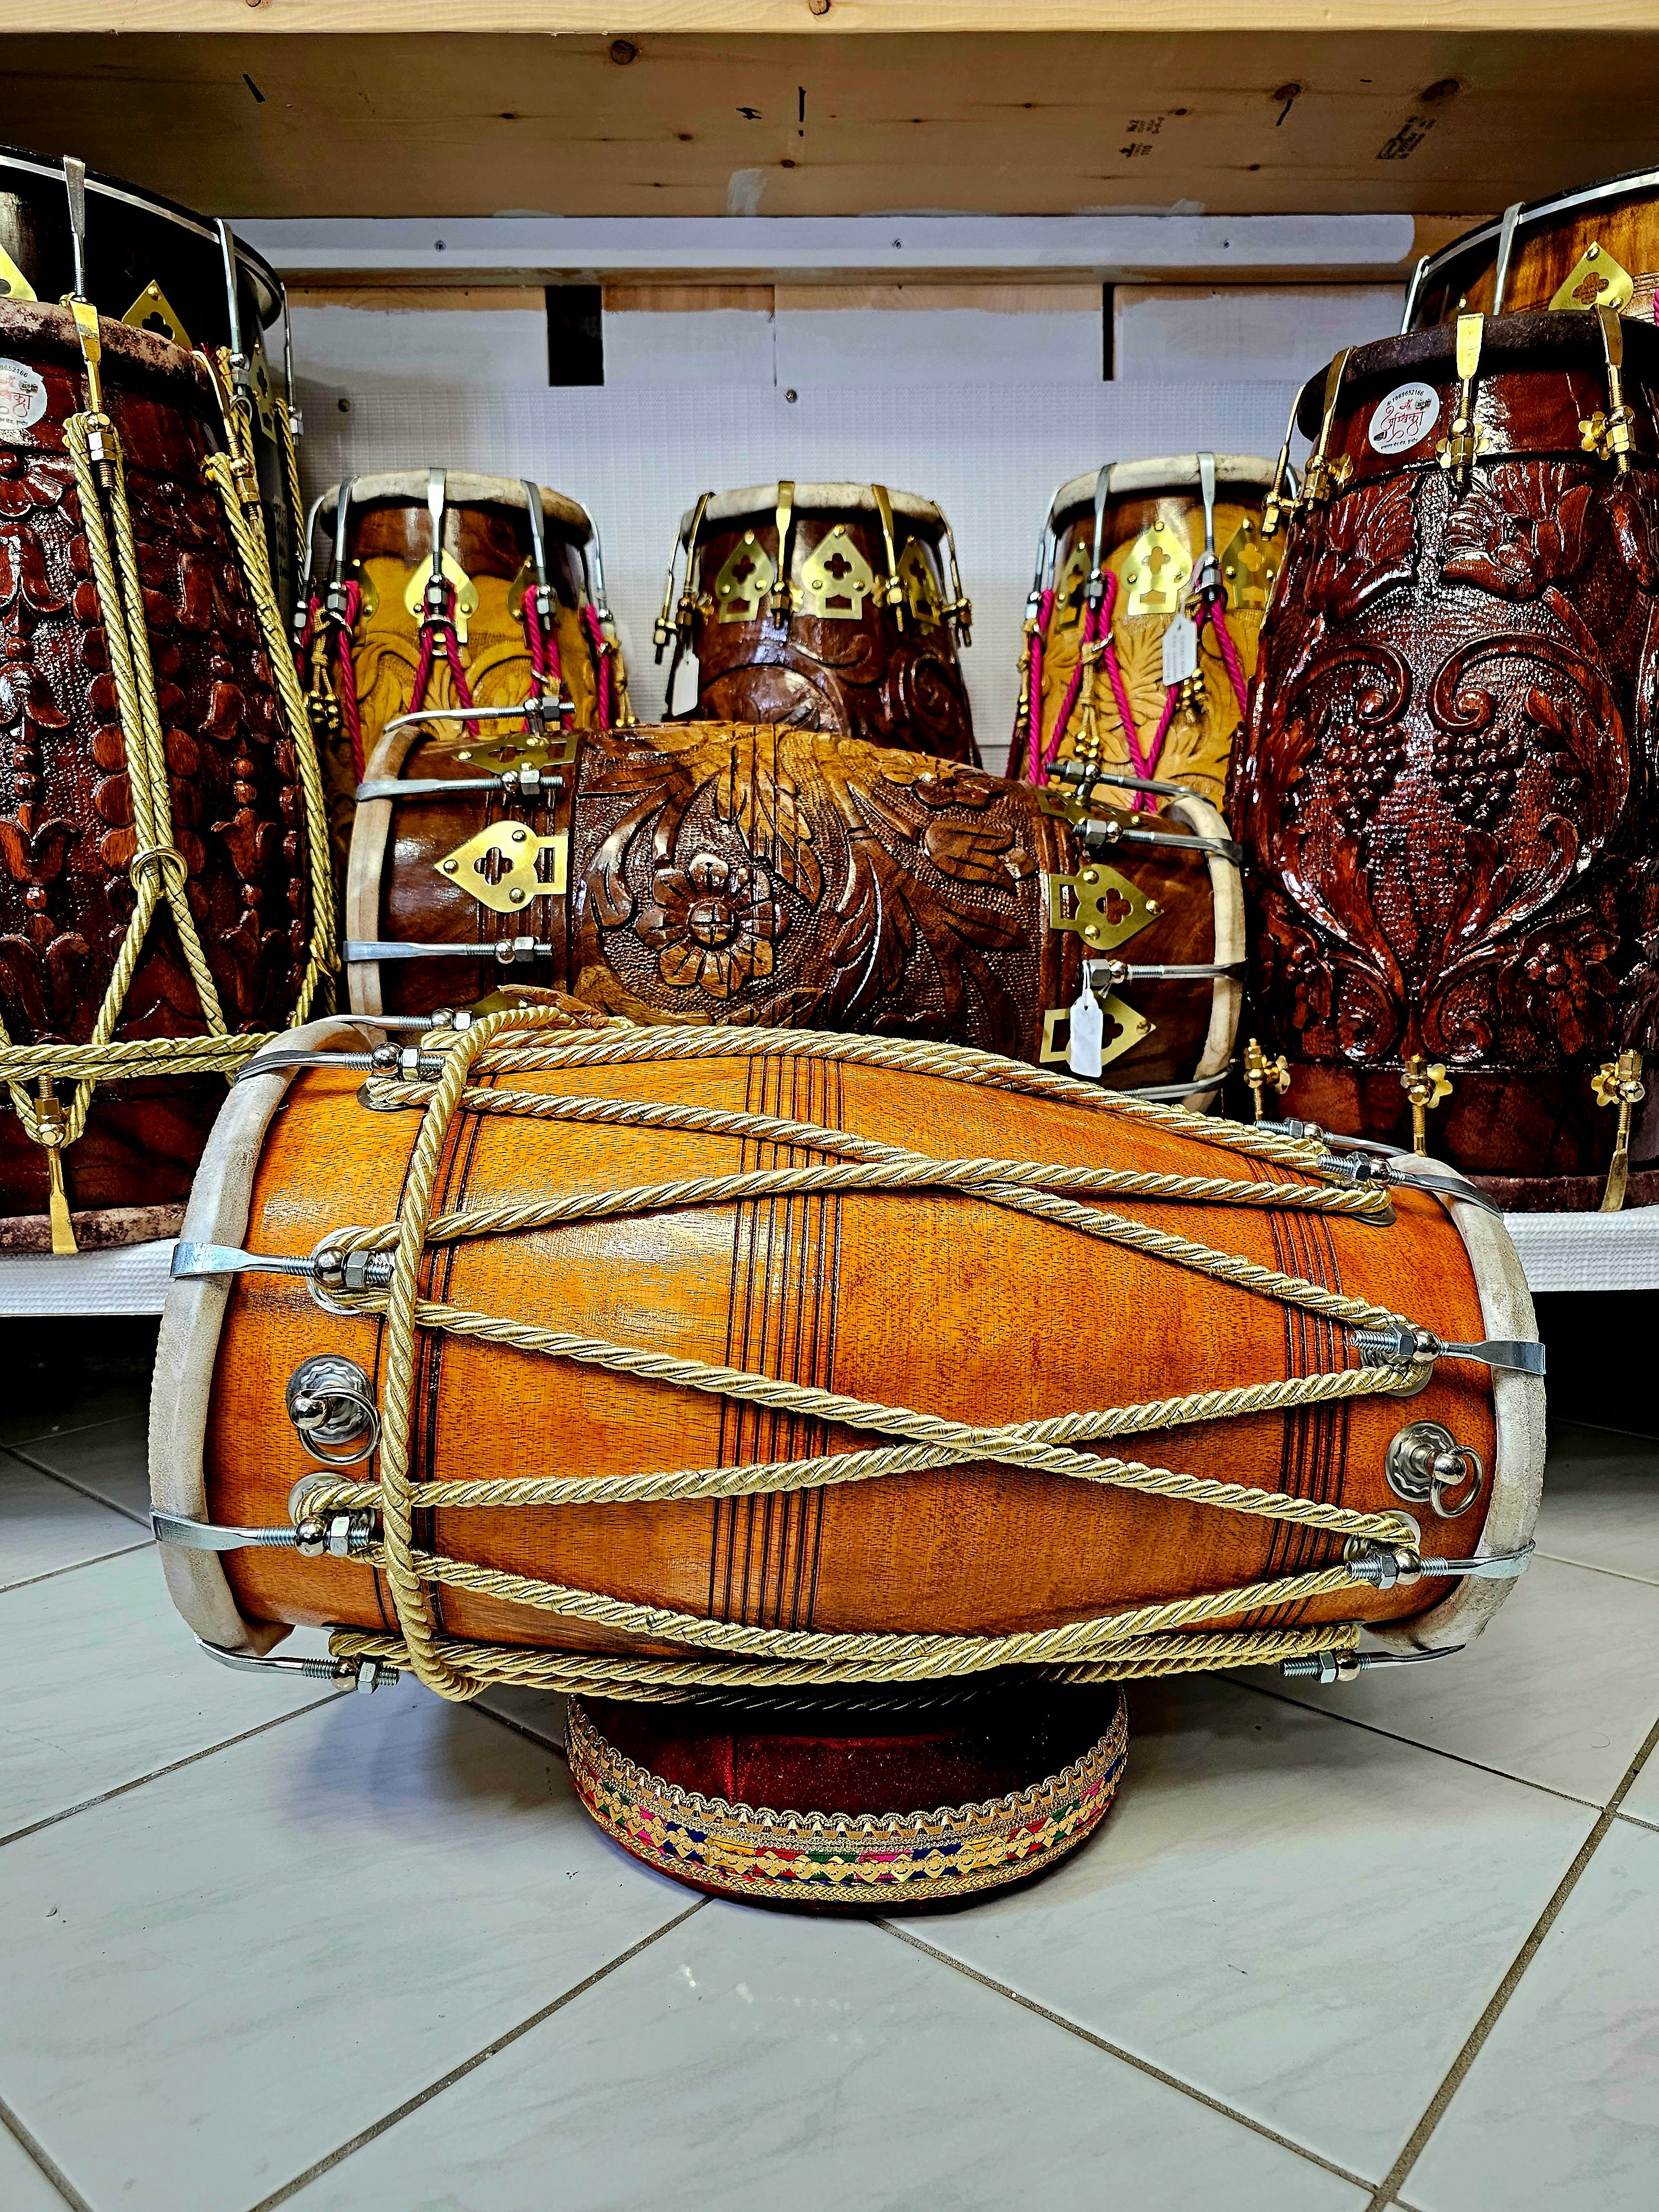 The ChromaGold Glosswood Dholak - A Professional Mango Wood Dholak with Golden Ropes, Natural Glossy Finish, and Chrome Bolts!